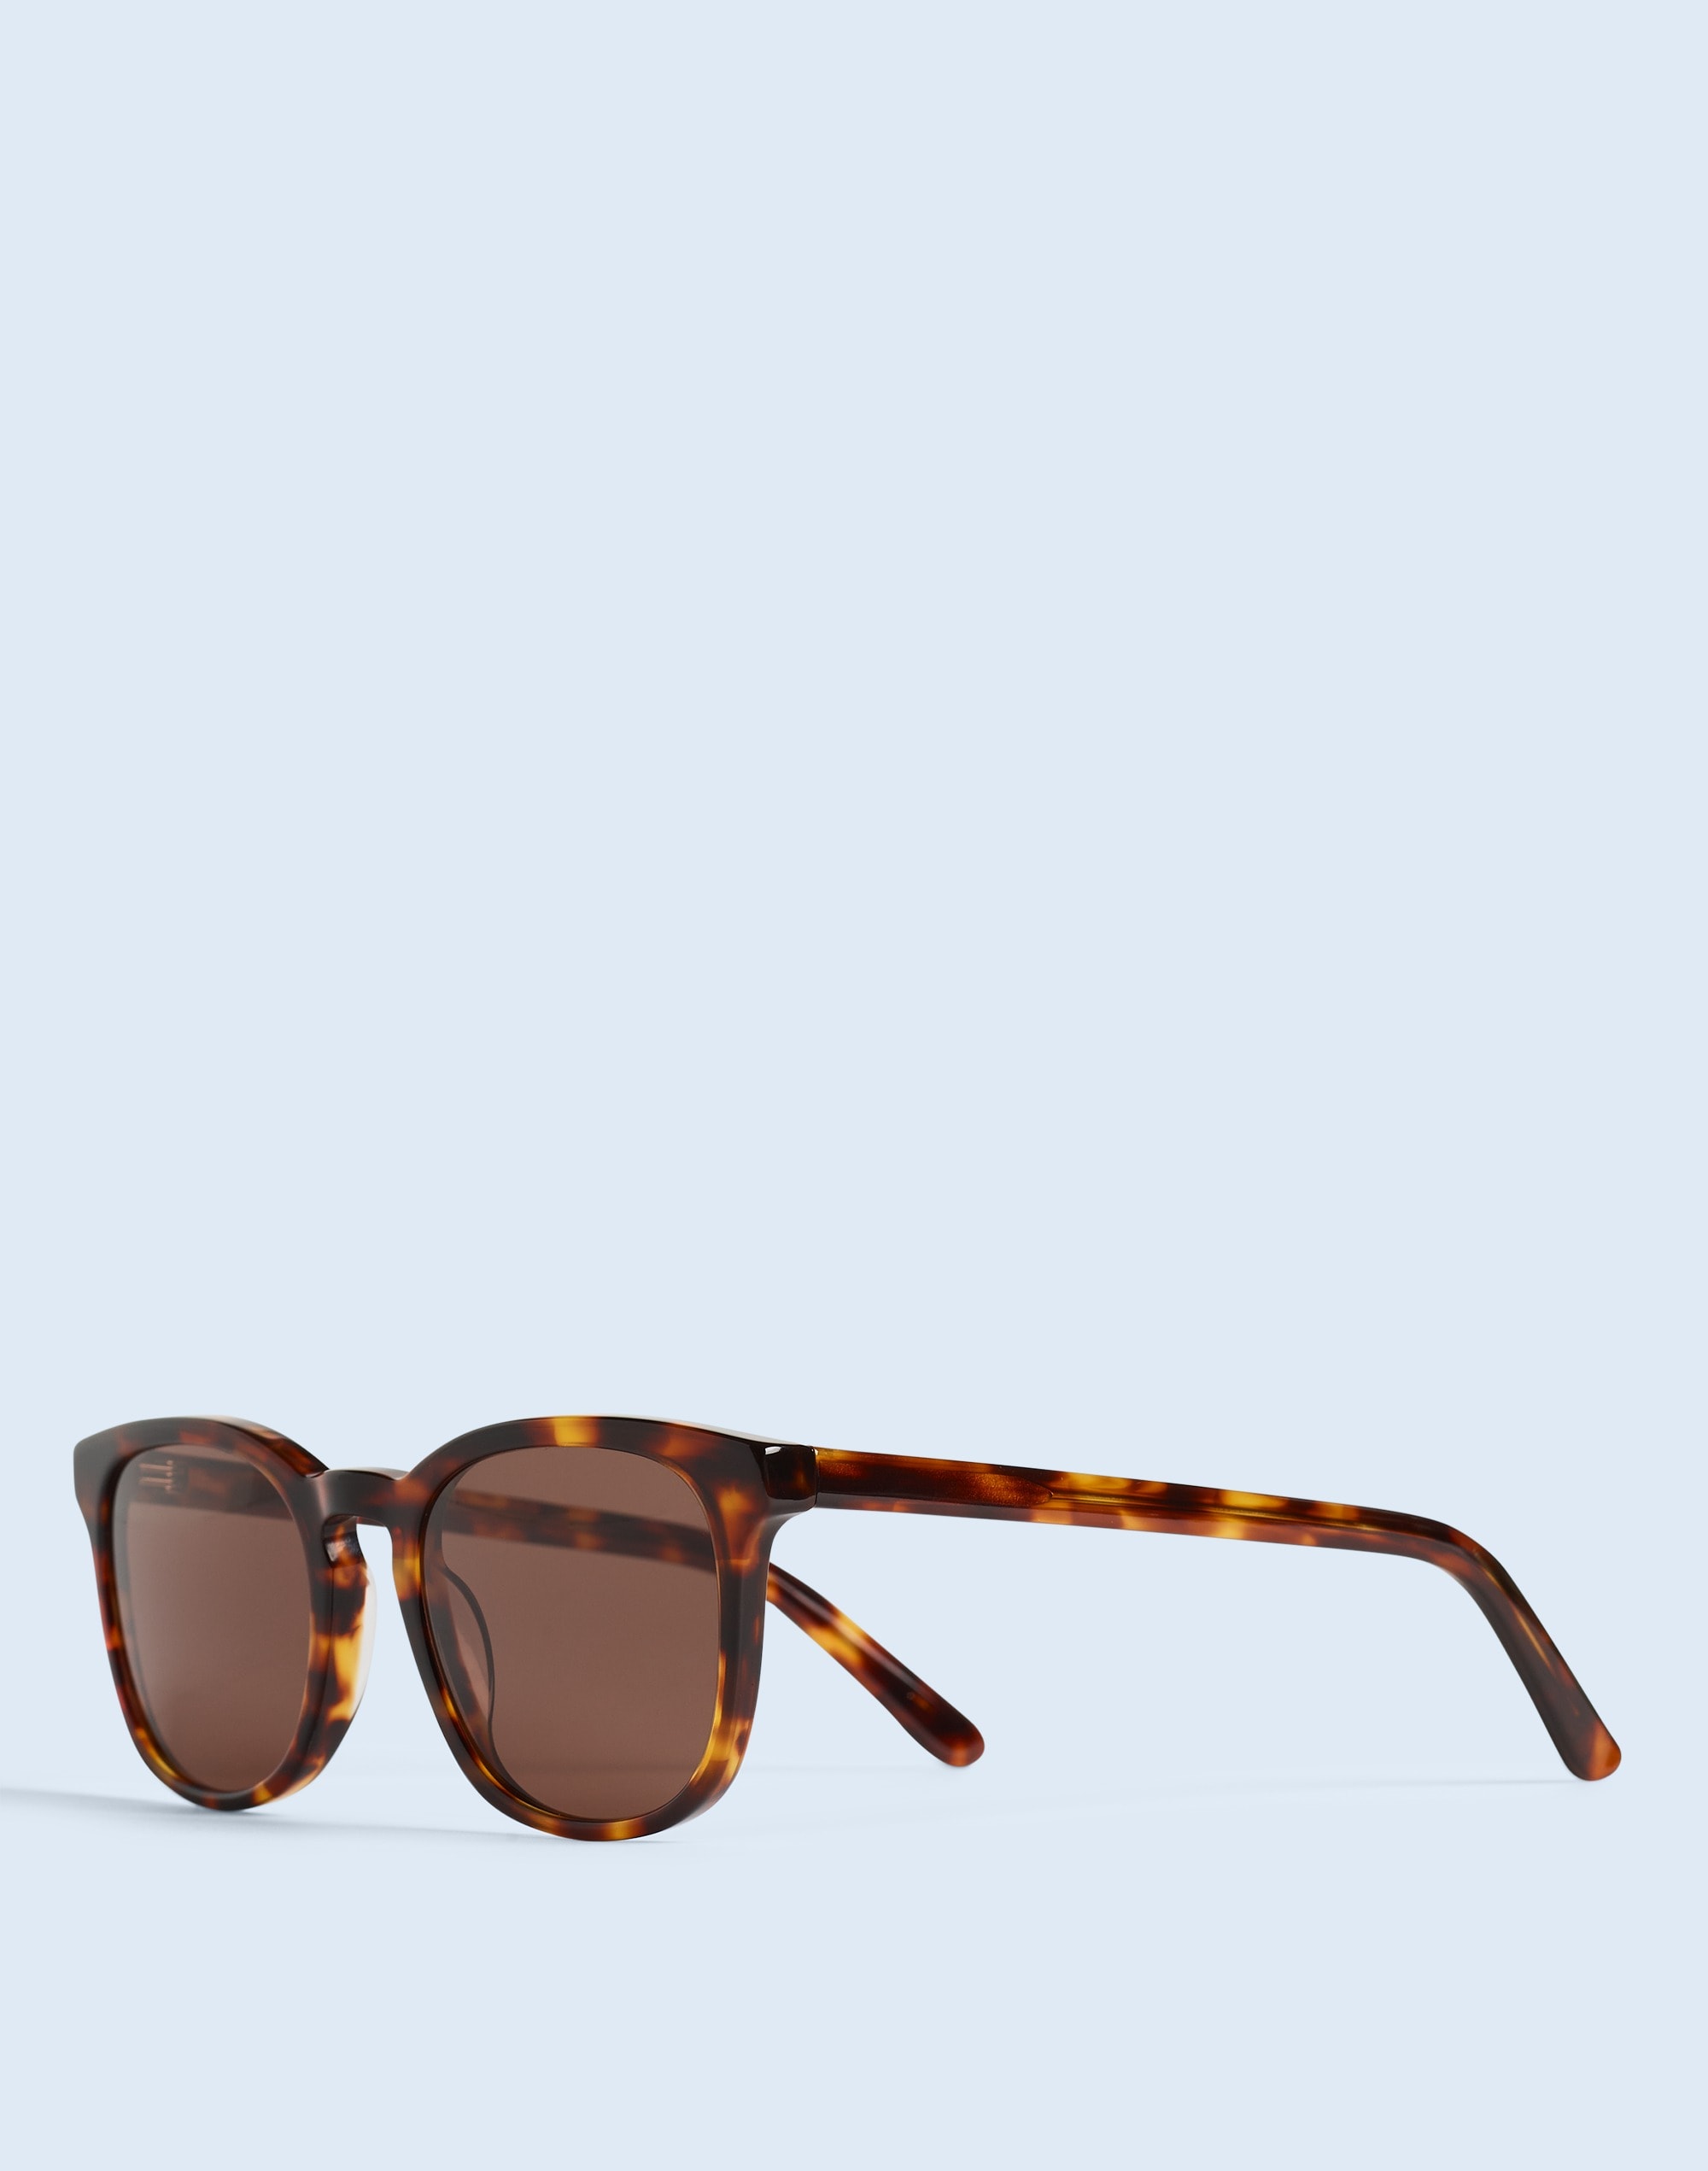 Mw Ashcroft Sunglasses In Whisky Tort